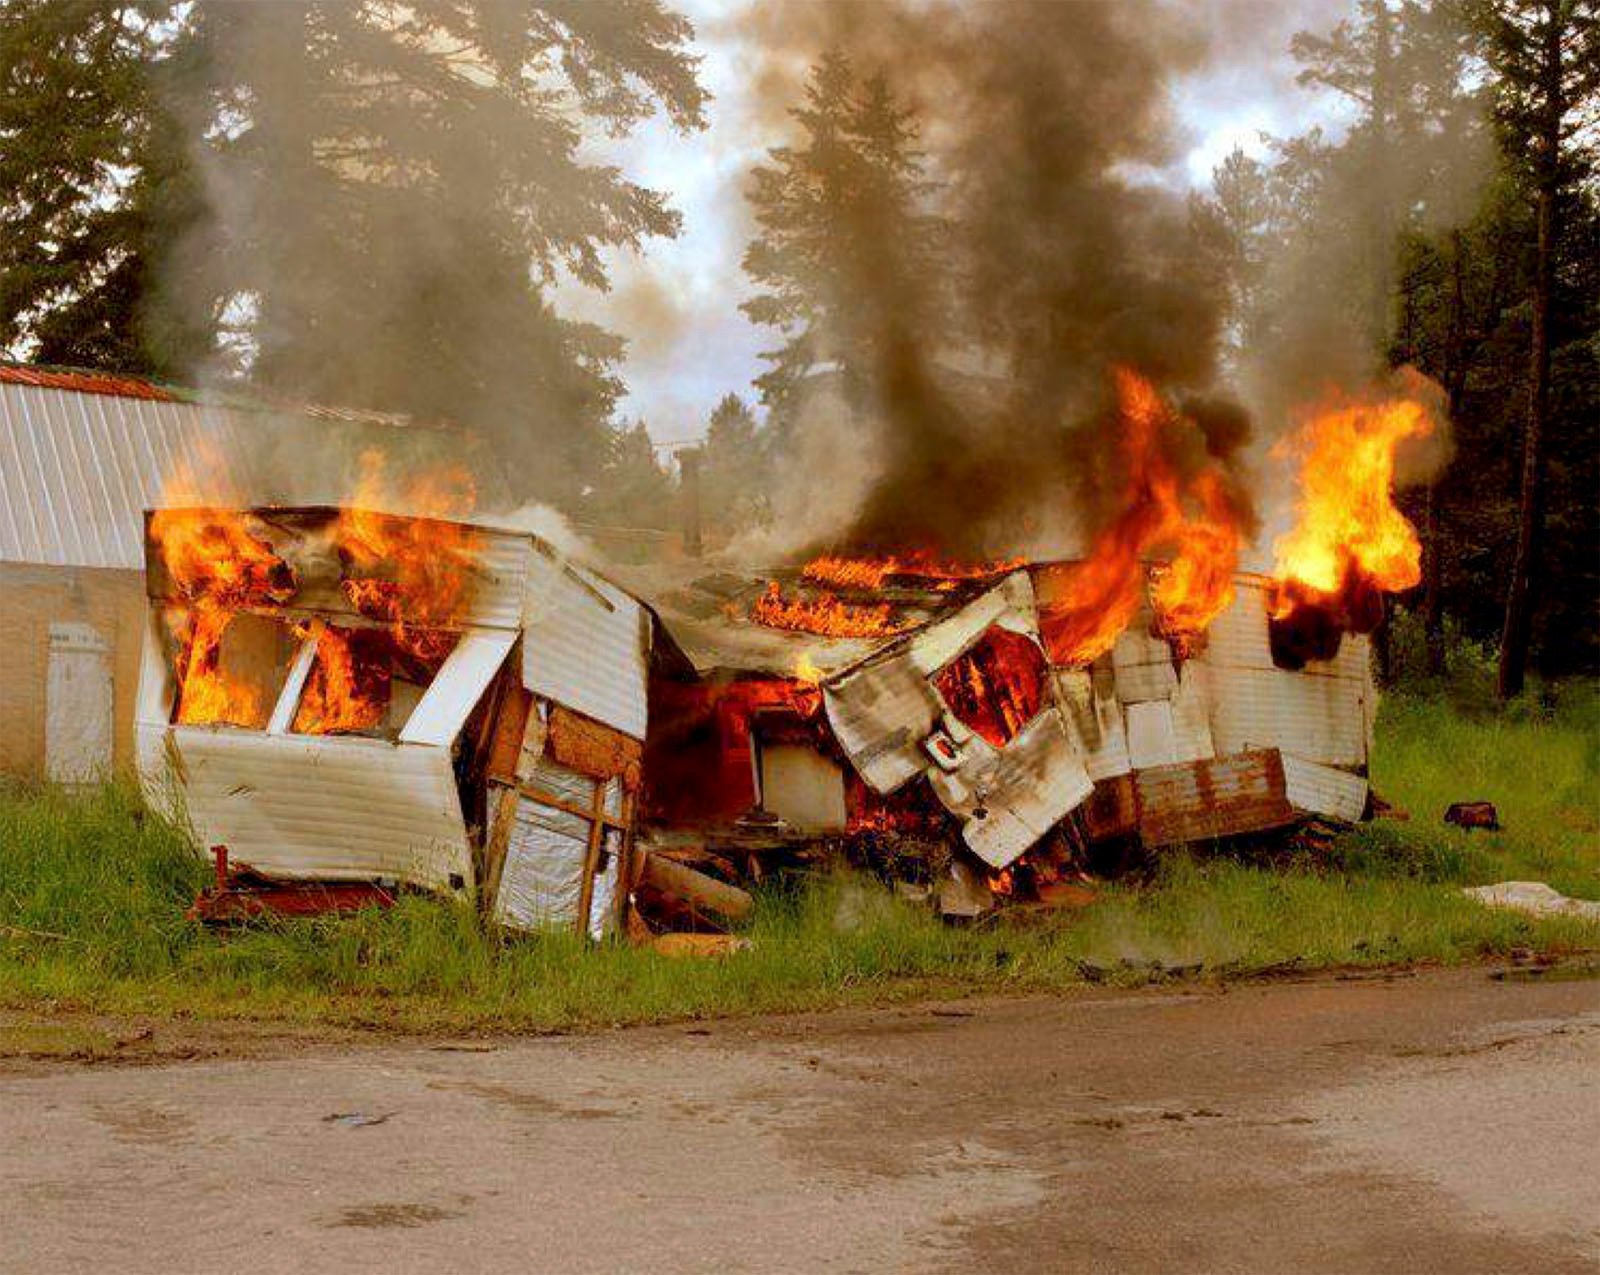 A dilapidated mobile home is engulfed in flames next to a forest, emitting thick smoke under a cloudy sky. the structure is mostly destroyed with visible bright orange and yellow fire consuming it.